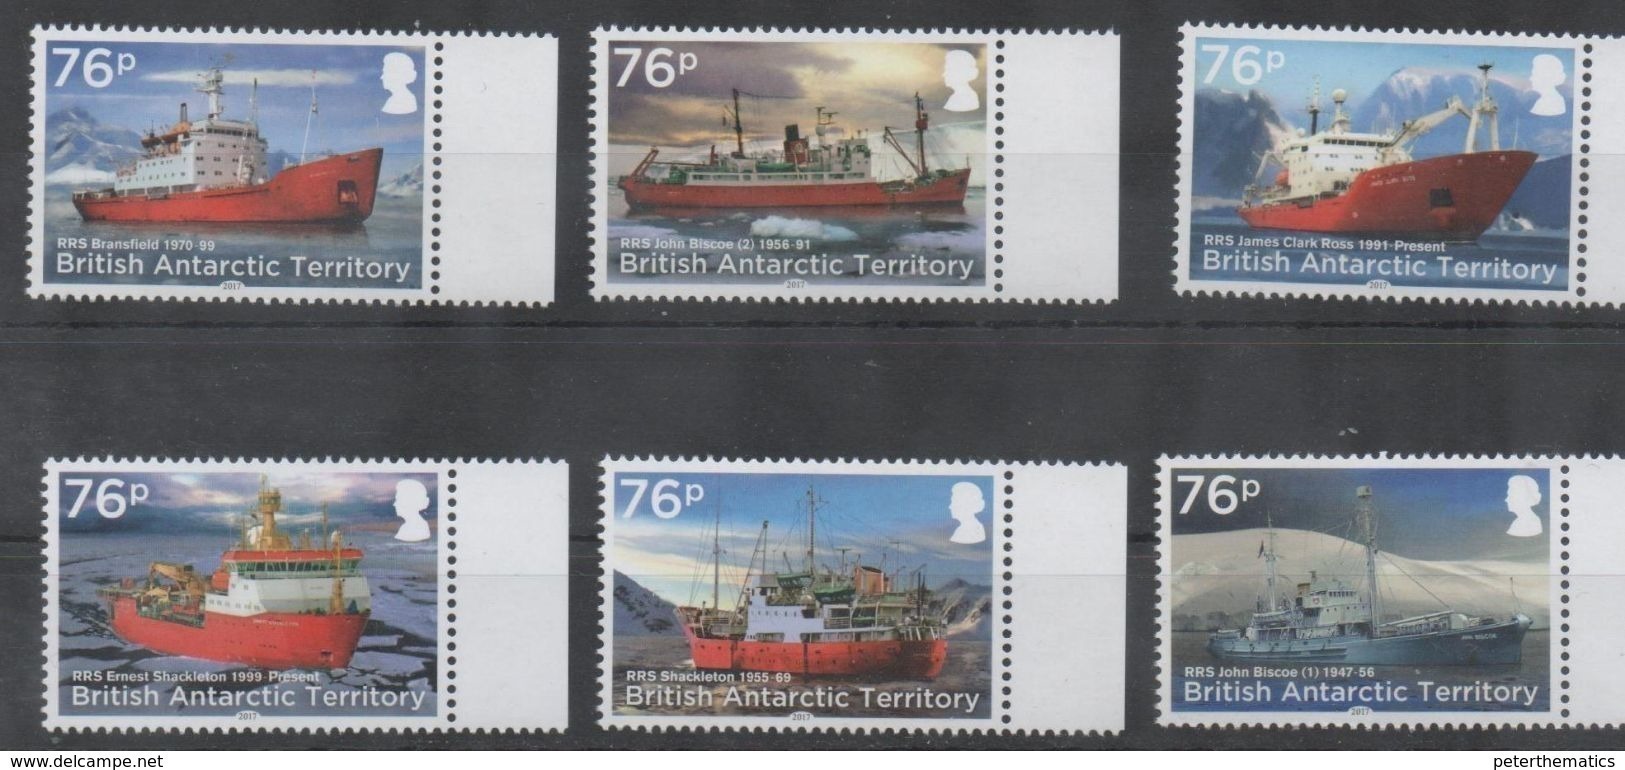 BRITISH ANTARCTIC TERRITORY, BAT,2017, MNH,SHIPS, RESEARCH VESSELS, MOUNTAINS, 6v - Barche